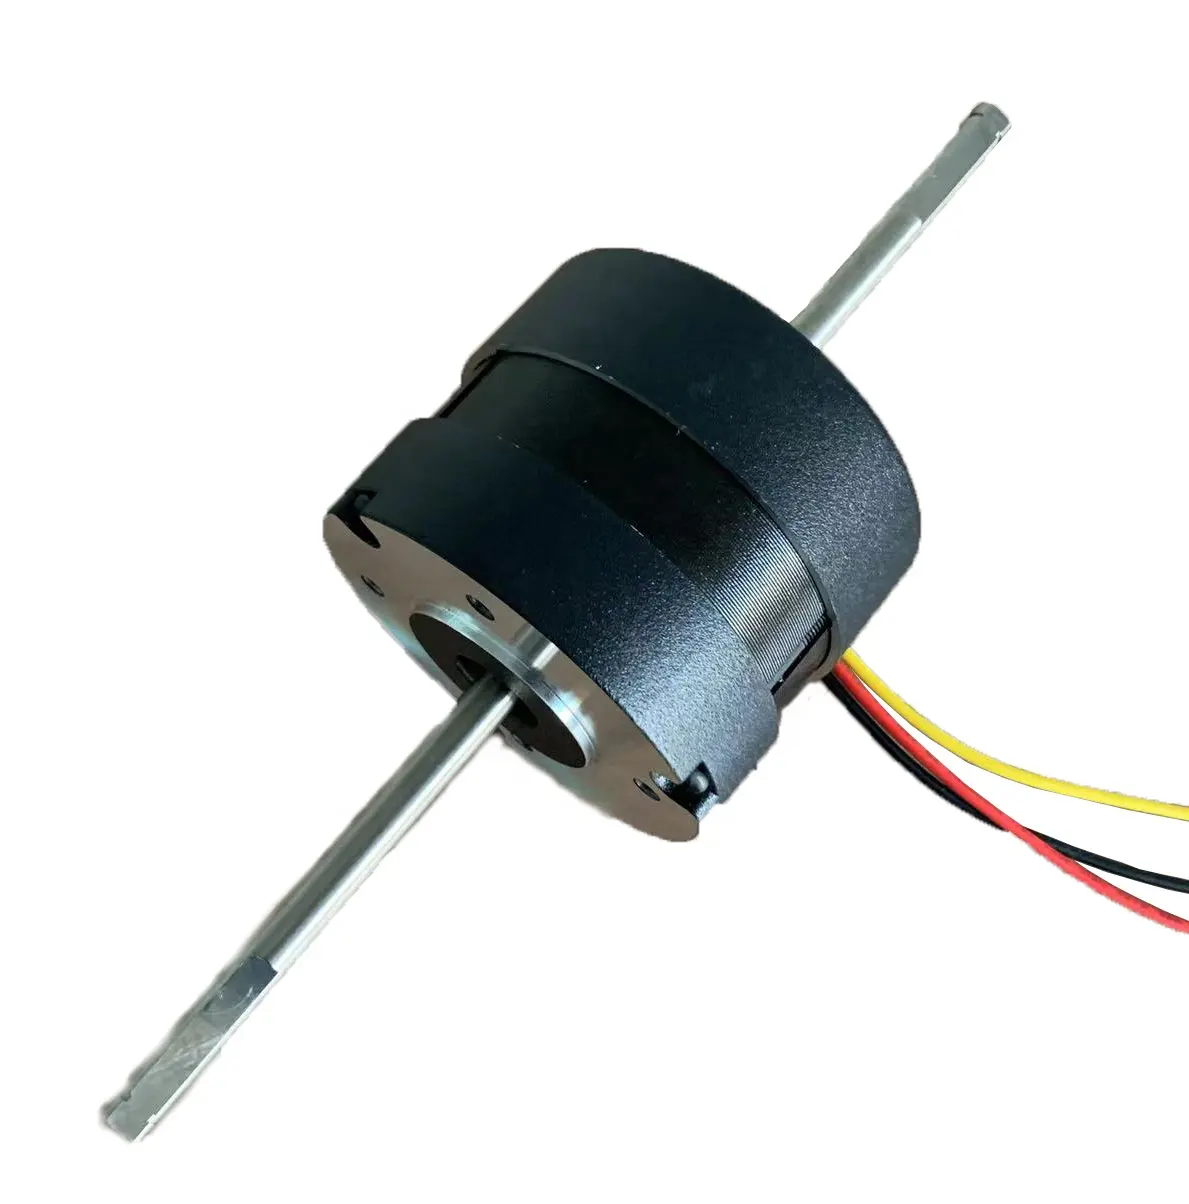 Custom 12v 18v 22v 24v Brushless Dc Fan Motor for Ventilation and Cooling Fans and Blowers 15w 30w 50w 100w 200w to 500w 800w